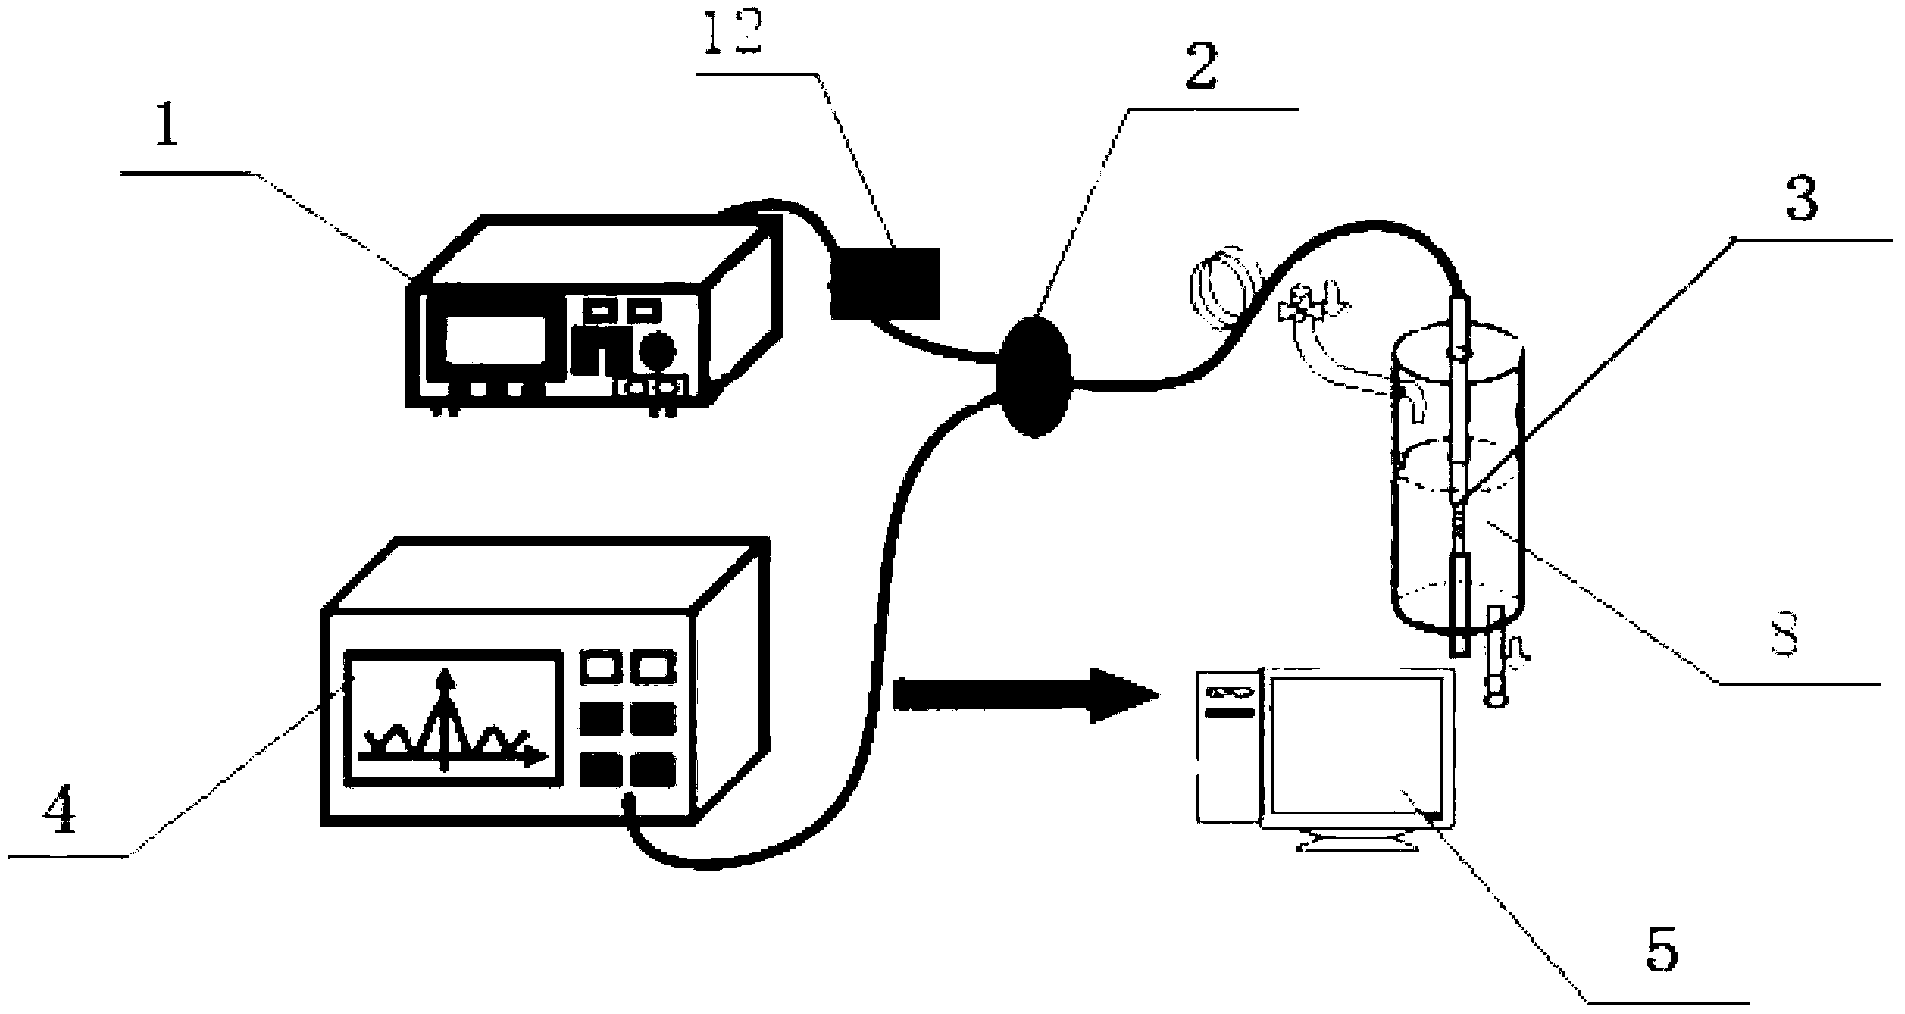 Method and system for measuring concentration of chemical solution by fiber bragg gratings (FBG)